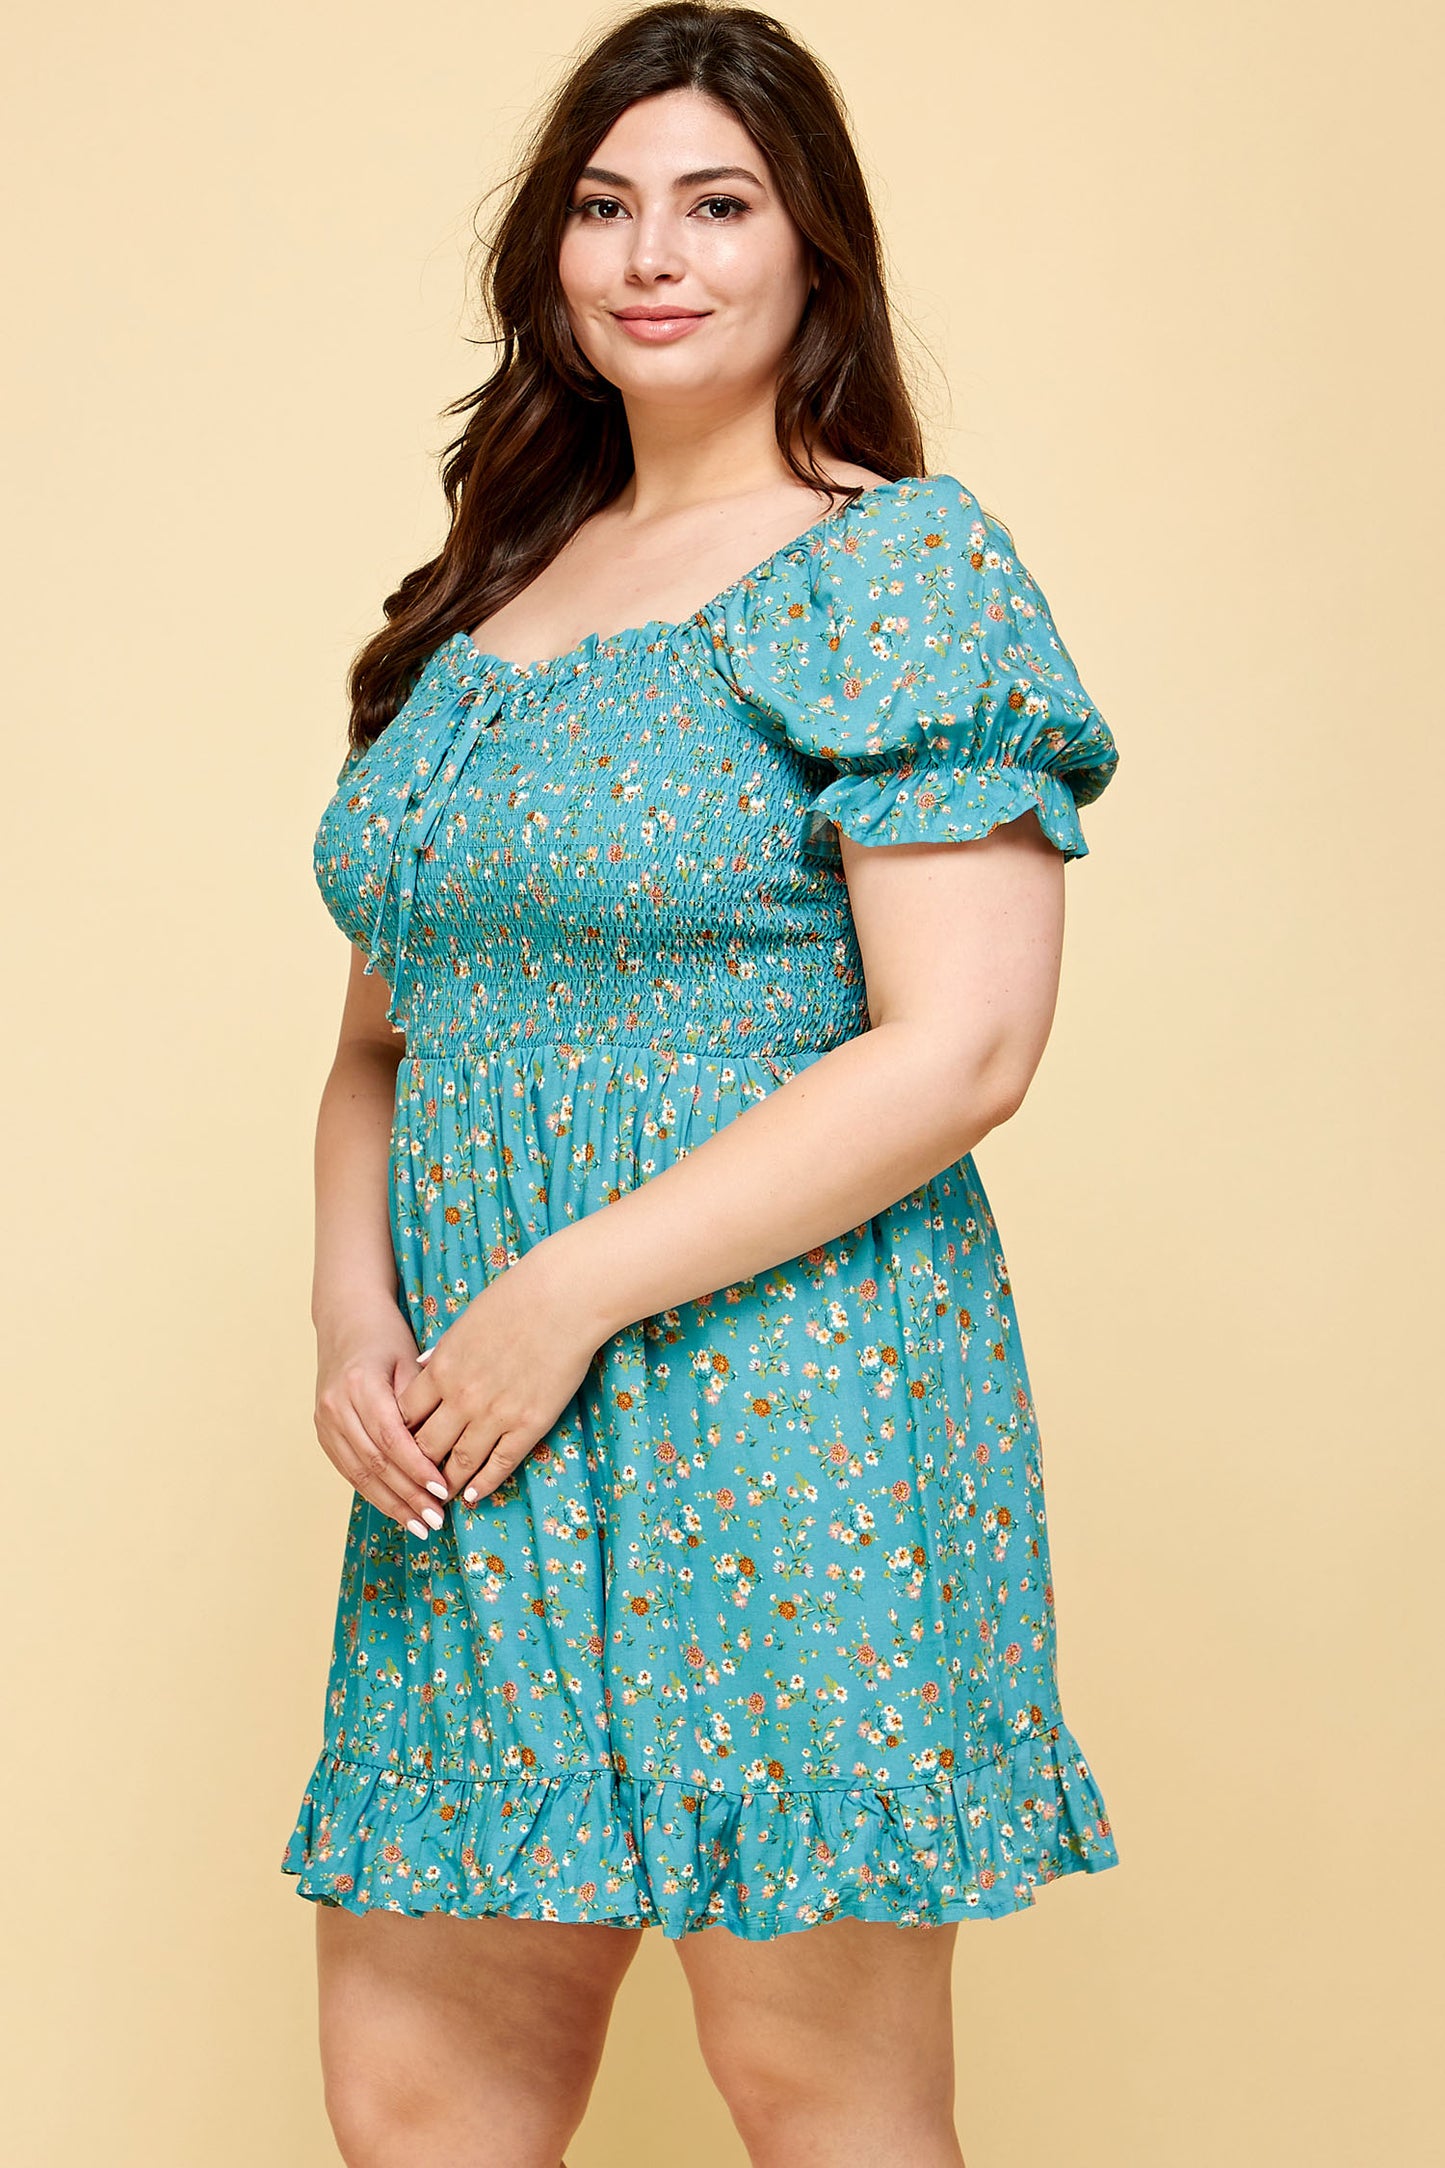 PLUS SIZE FLORAL BABYDOLL DRESS IN TEAL